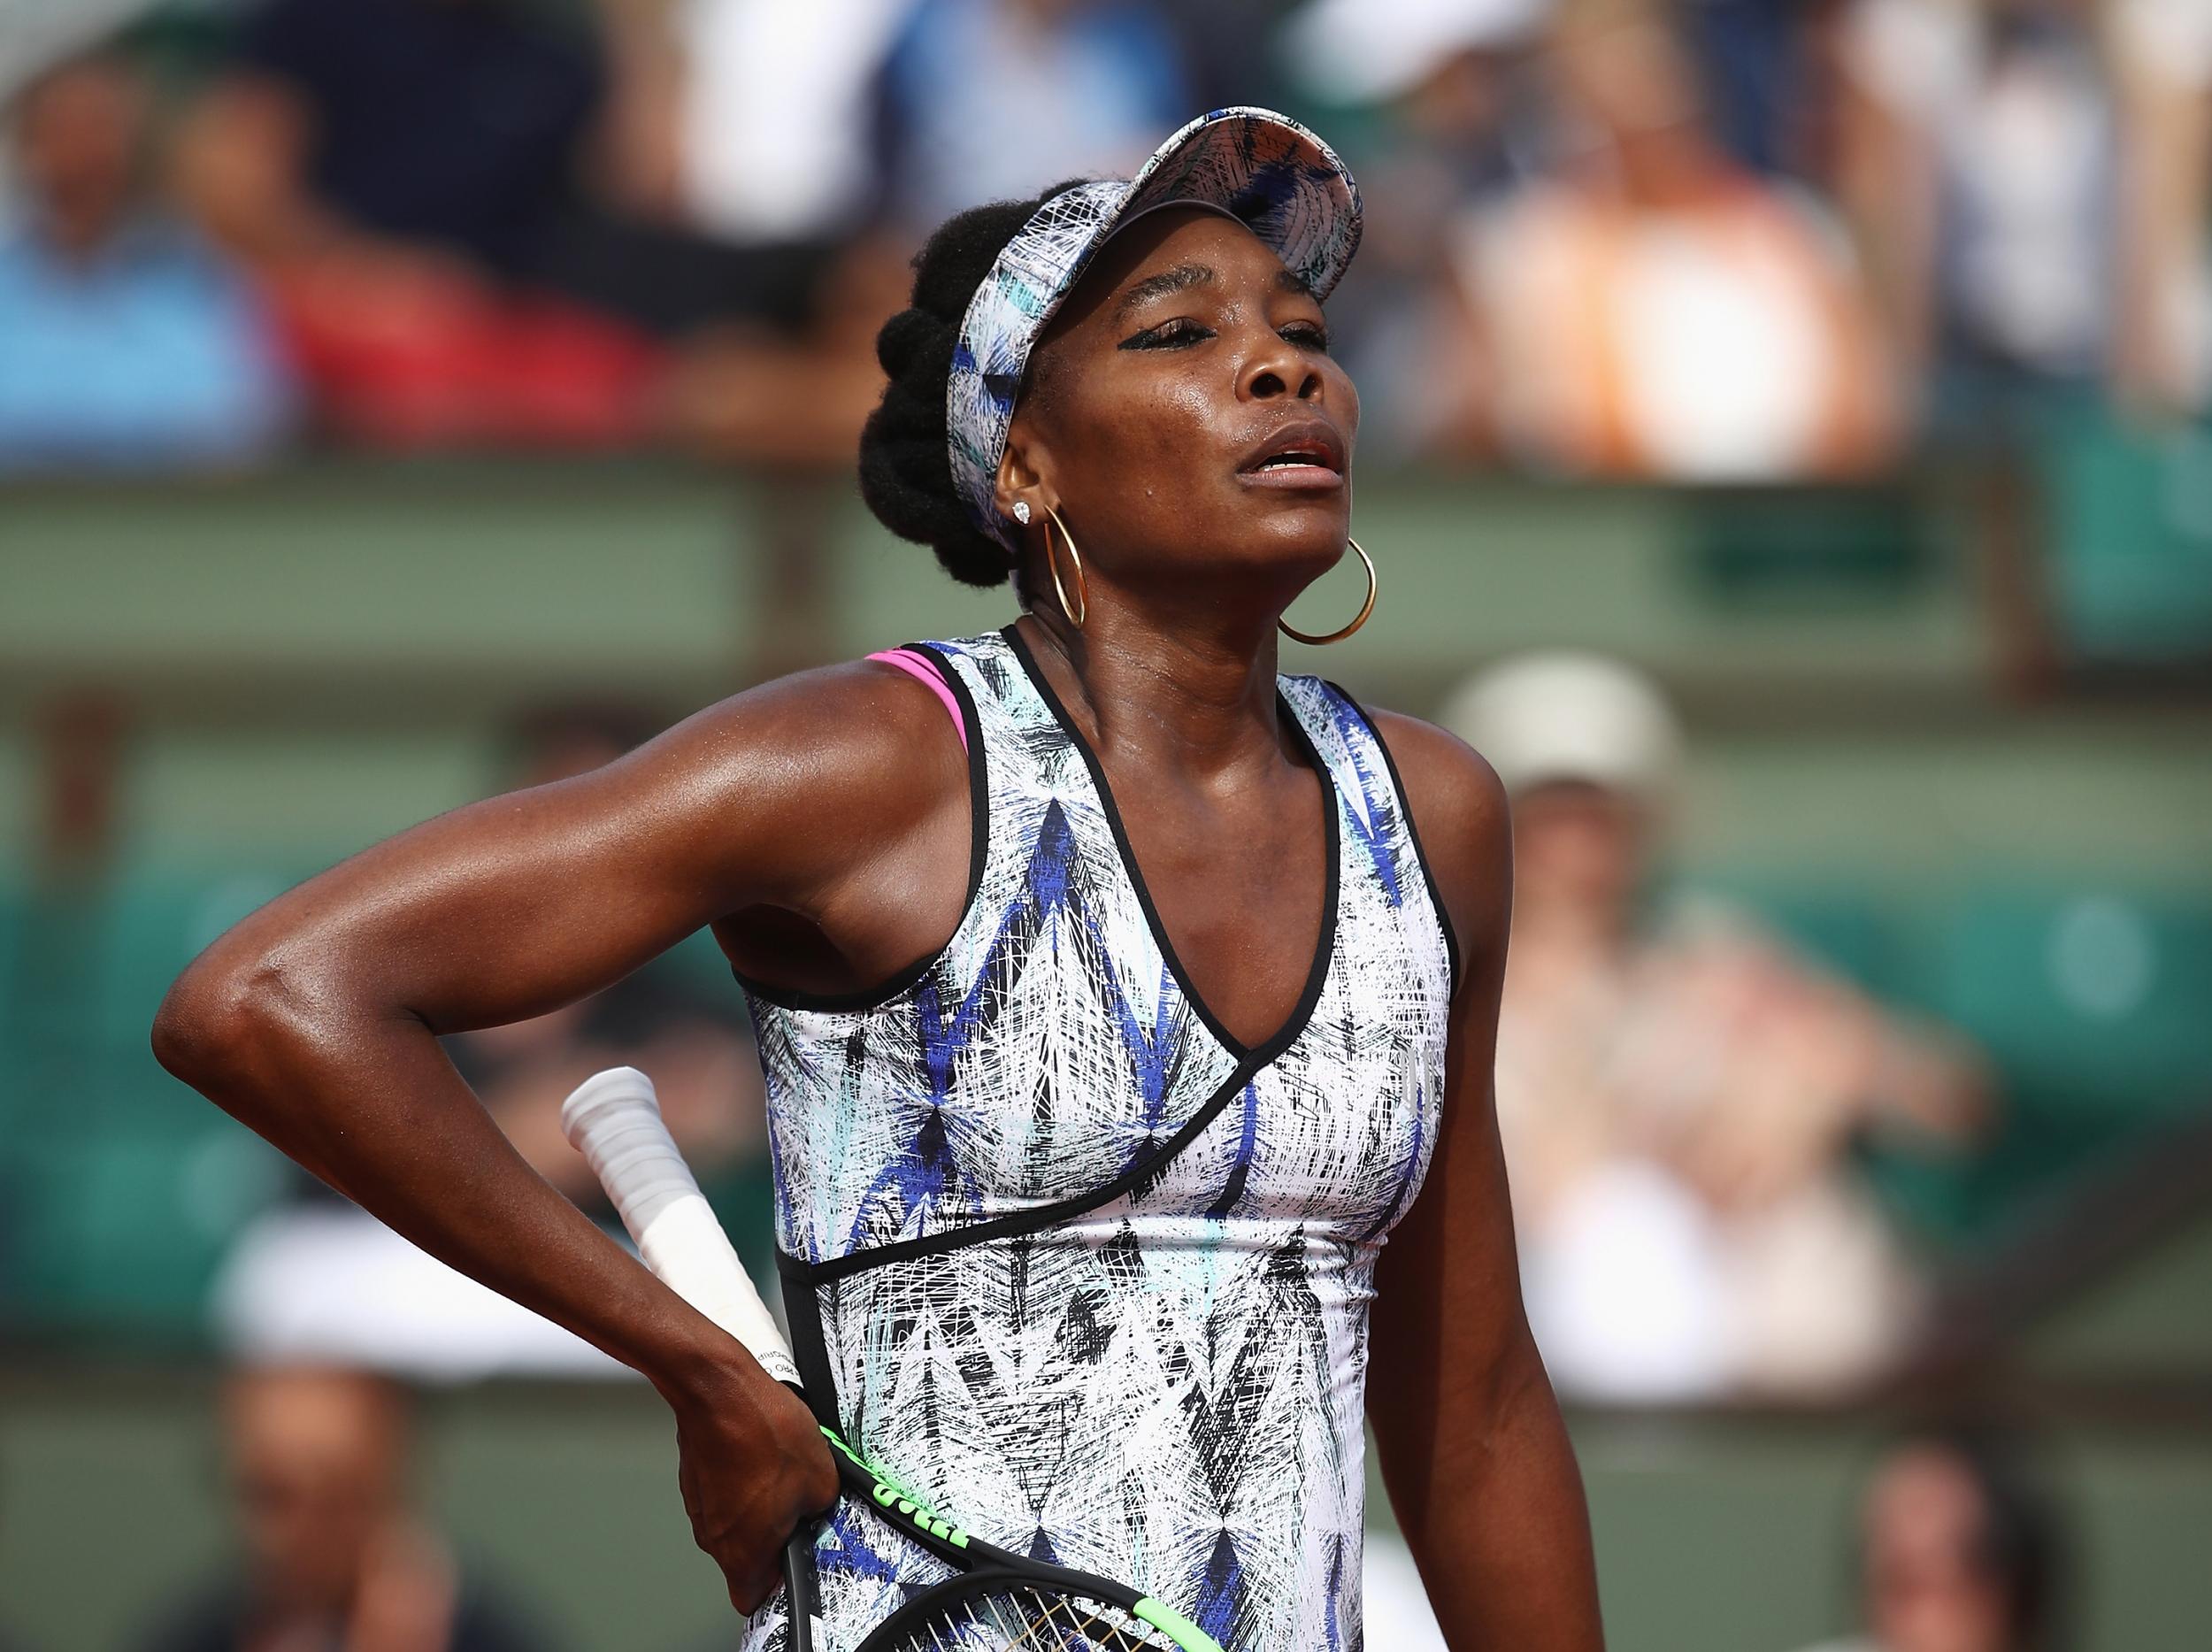 Williams will begin her quest for a sixth Wimbledon singles crown next week